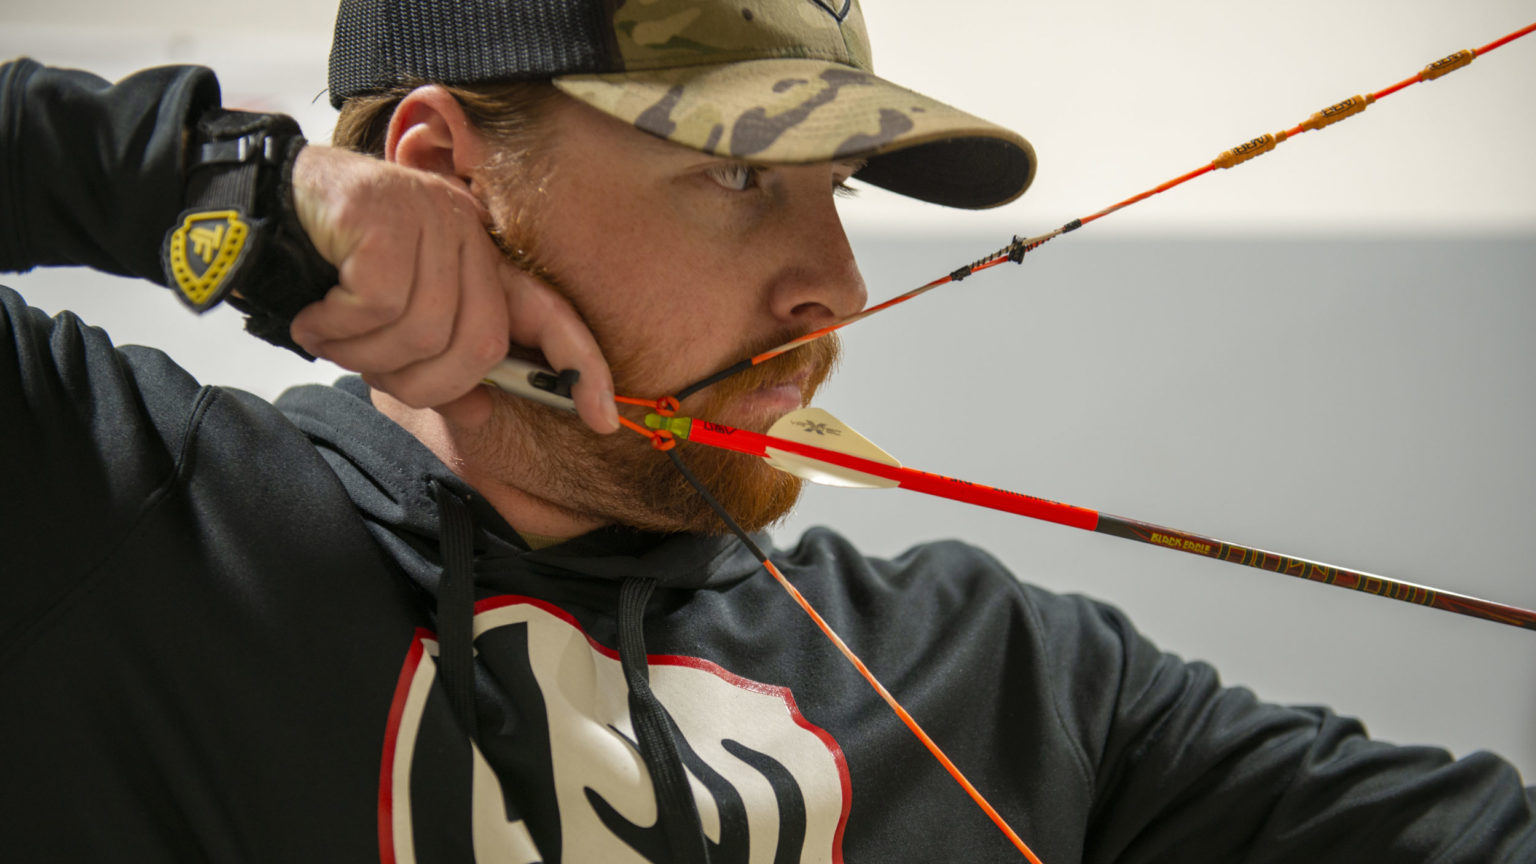 Getting Started The Bowhunting Basics